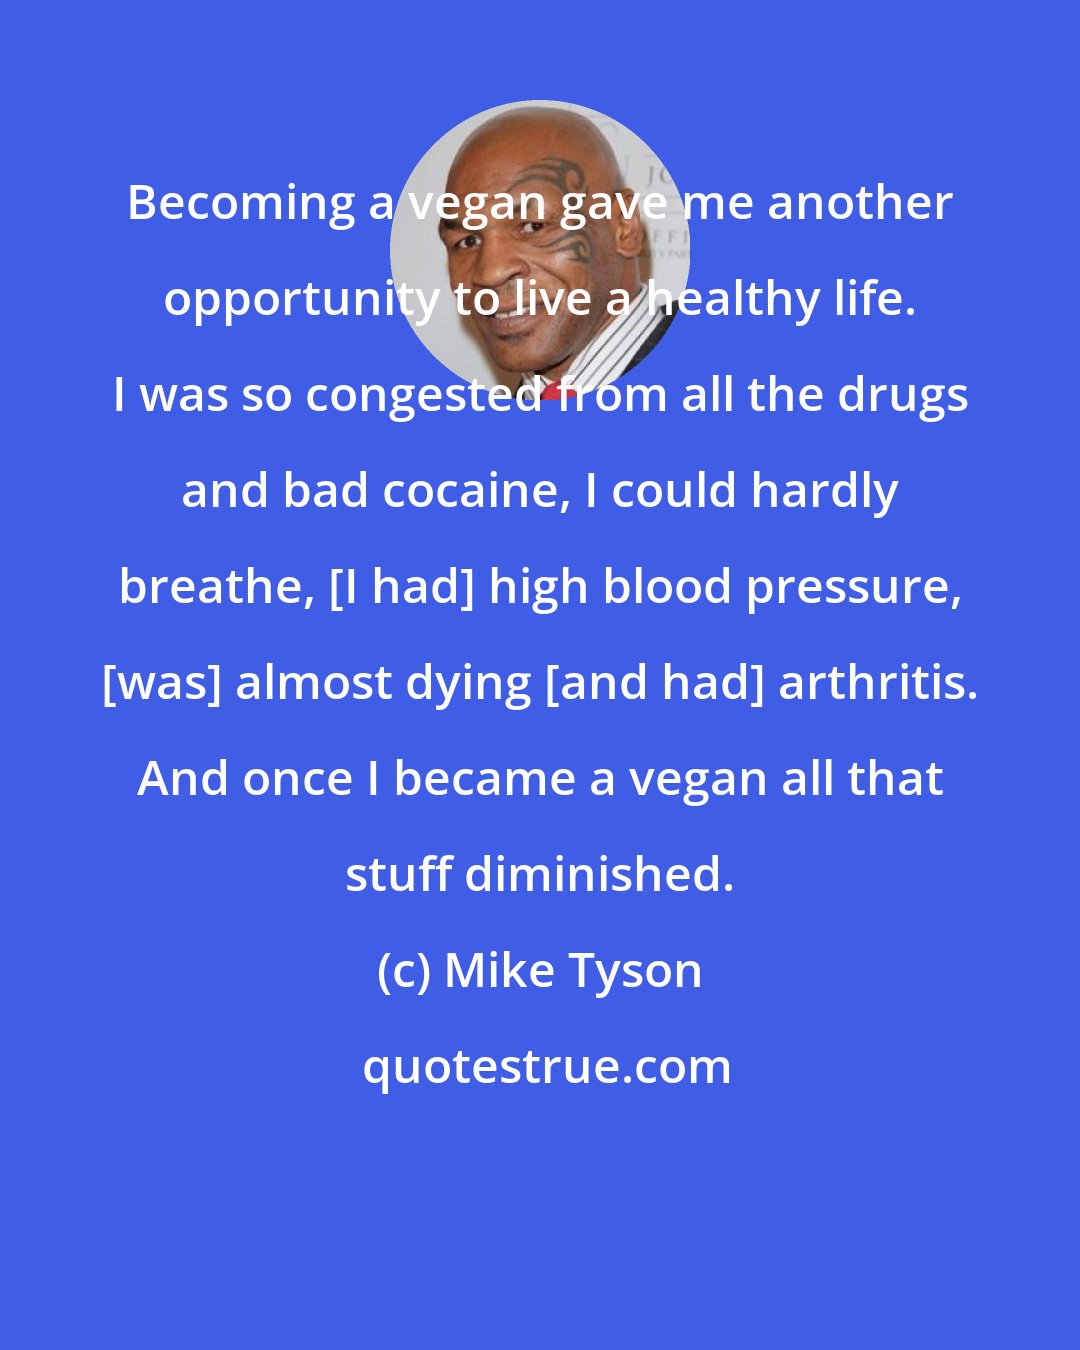 Mike Tyson: Becoming a vegan gave me another opportunity to live a healthy life. I was so congested from all the drugs and bad cocaine, I could hardly breathe, [I had] high blood pressure, [was] almost dying [and had] arthritis. And once I became a vegan all that stuff diminished.